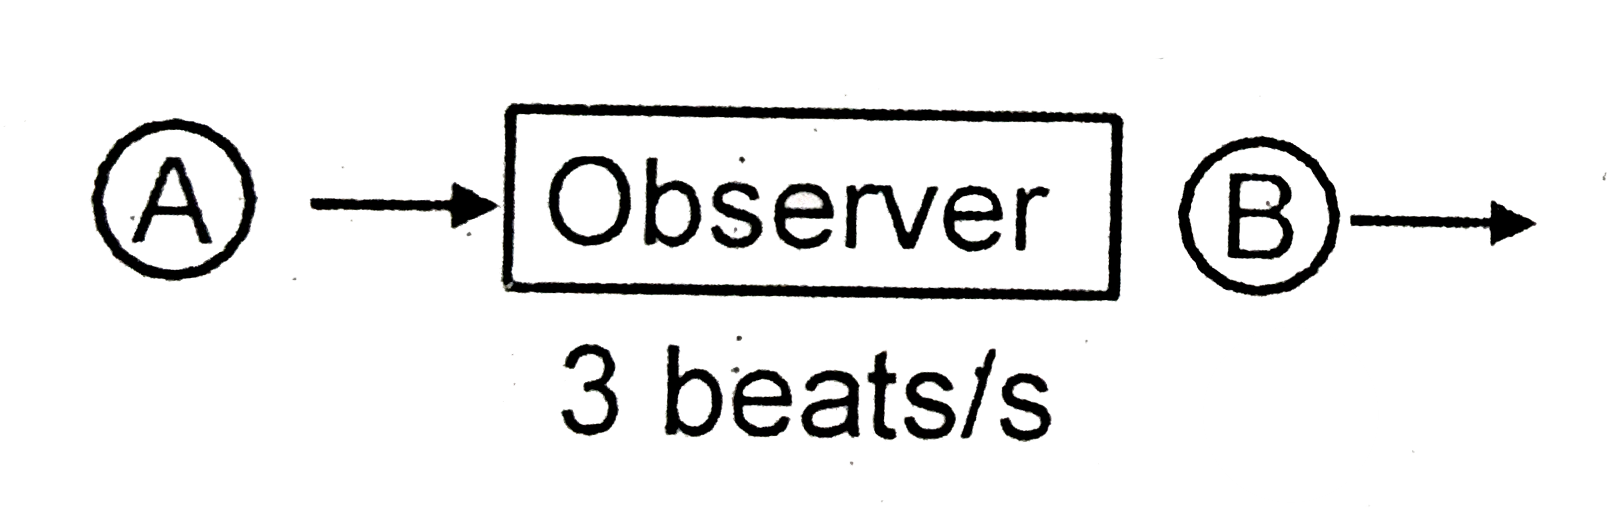 Two sources  of sound S1 and s2 are moving towards and away from a stationery  observer with same speed respectively . Observer detects 3 beats per second. Find speed of sources (approximately) .   Given, F1=F2=500 Hz, speed of air = 330 m/s